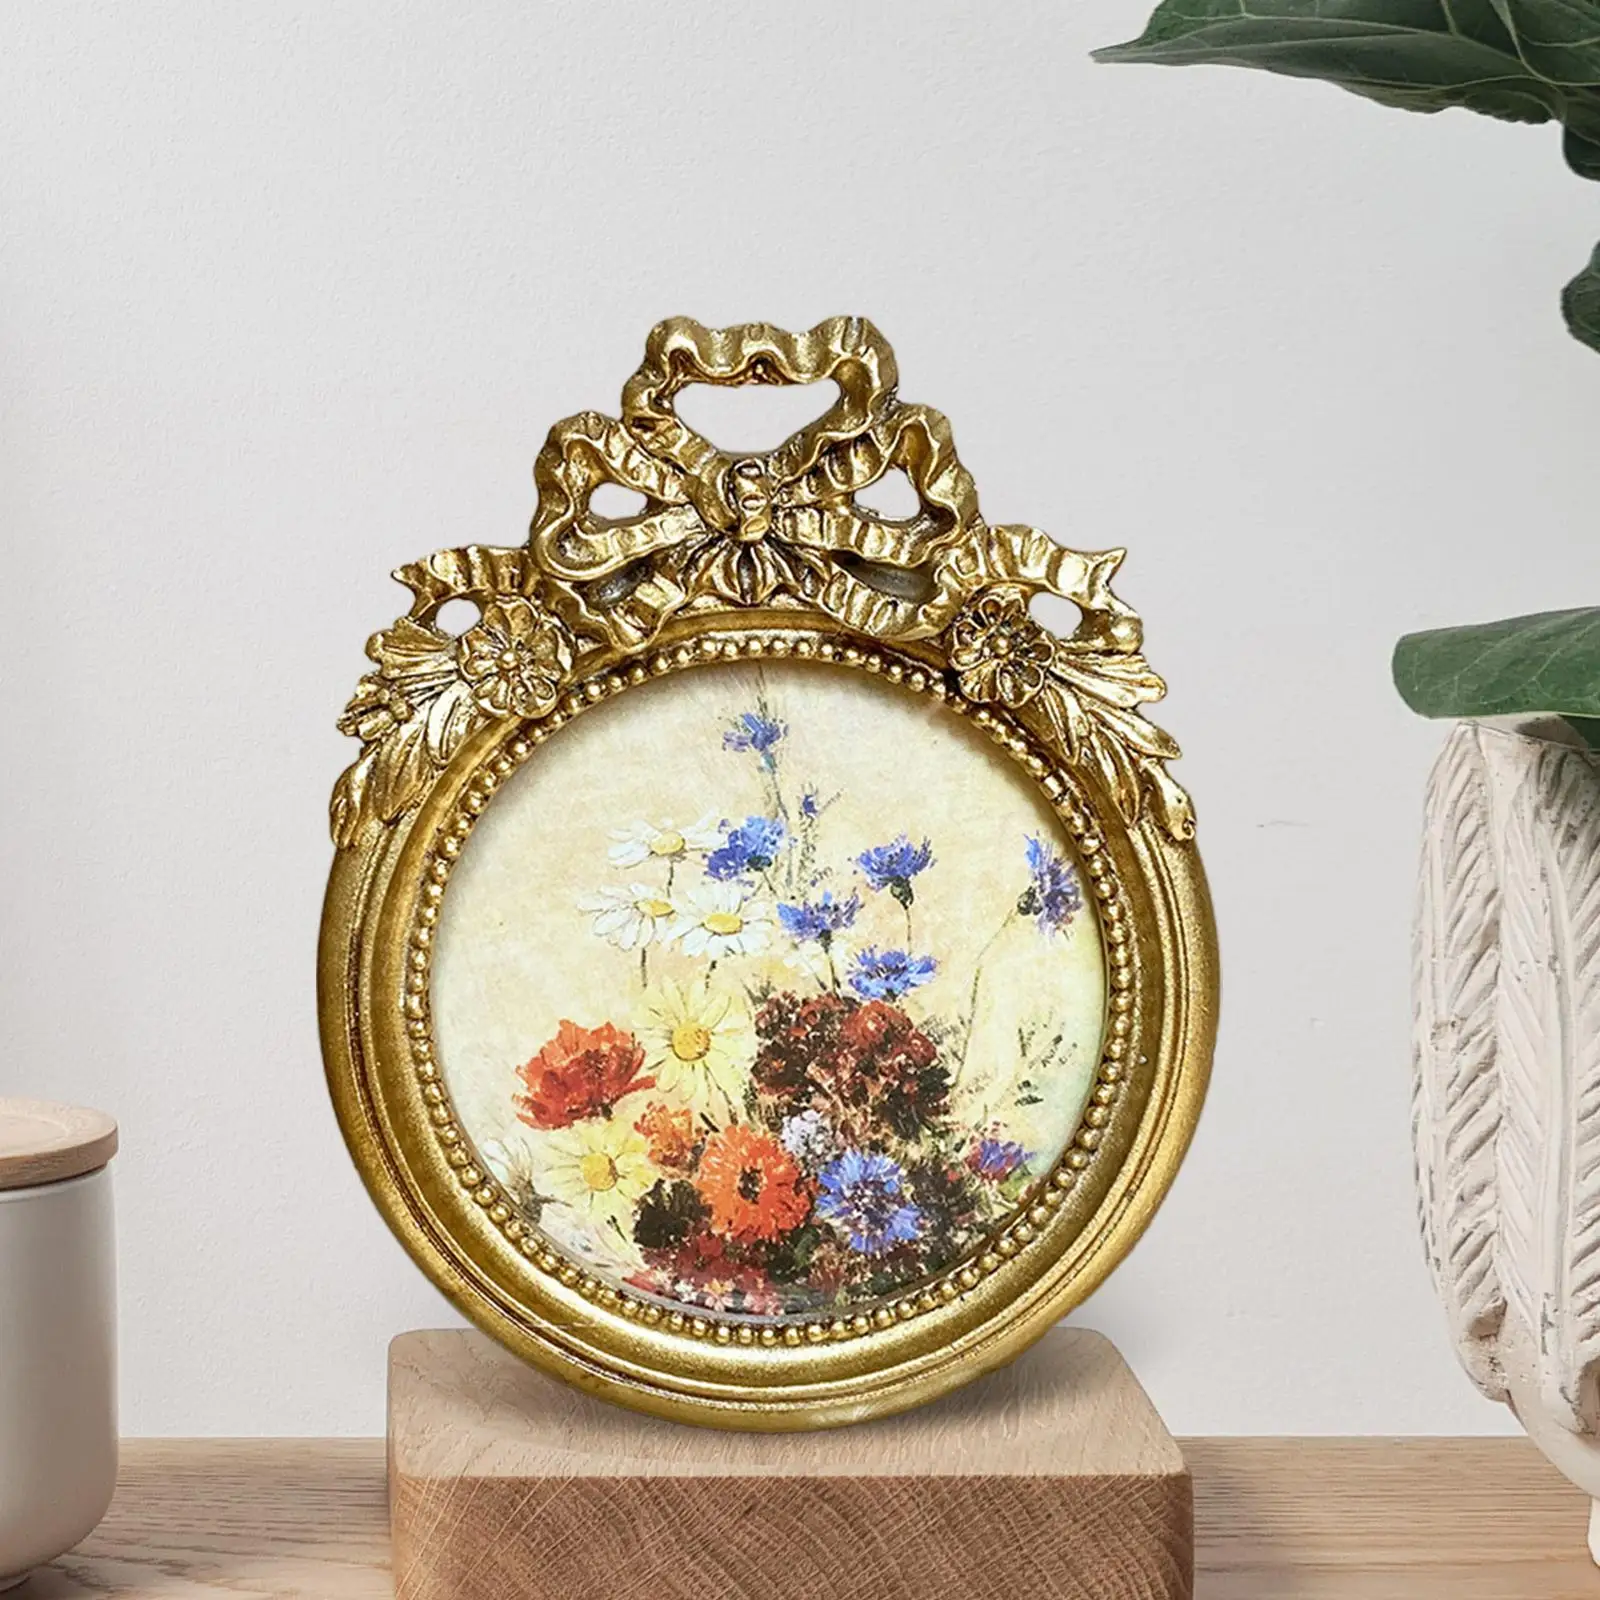 Antique Photo Frame Round Embossed Decorative 3x3 inch Desktop and Wall Hanging for Wedding Bedroom Retro Home Decor Gift Ideas